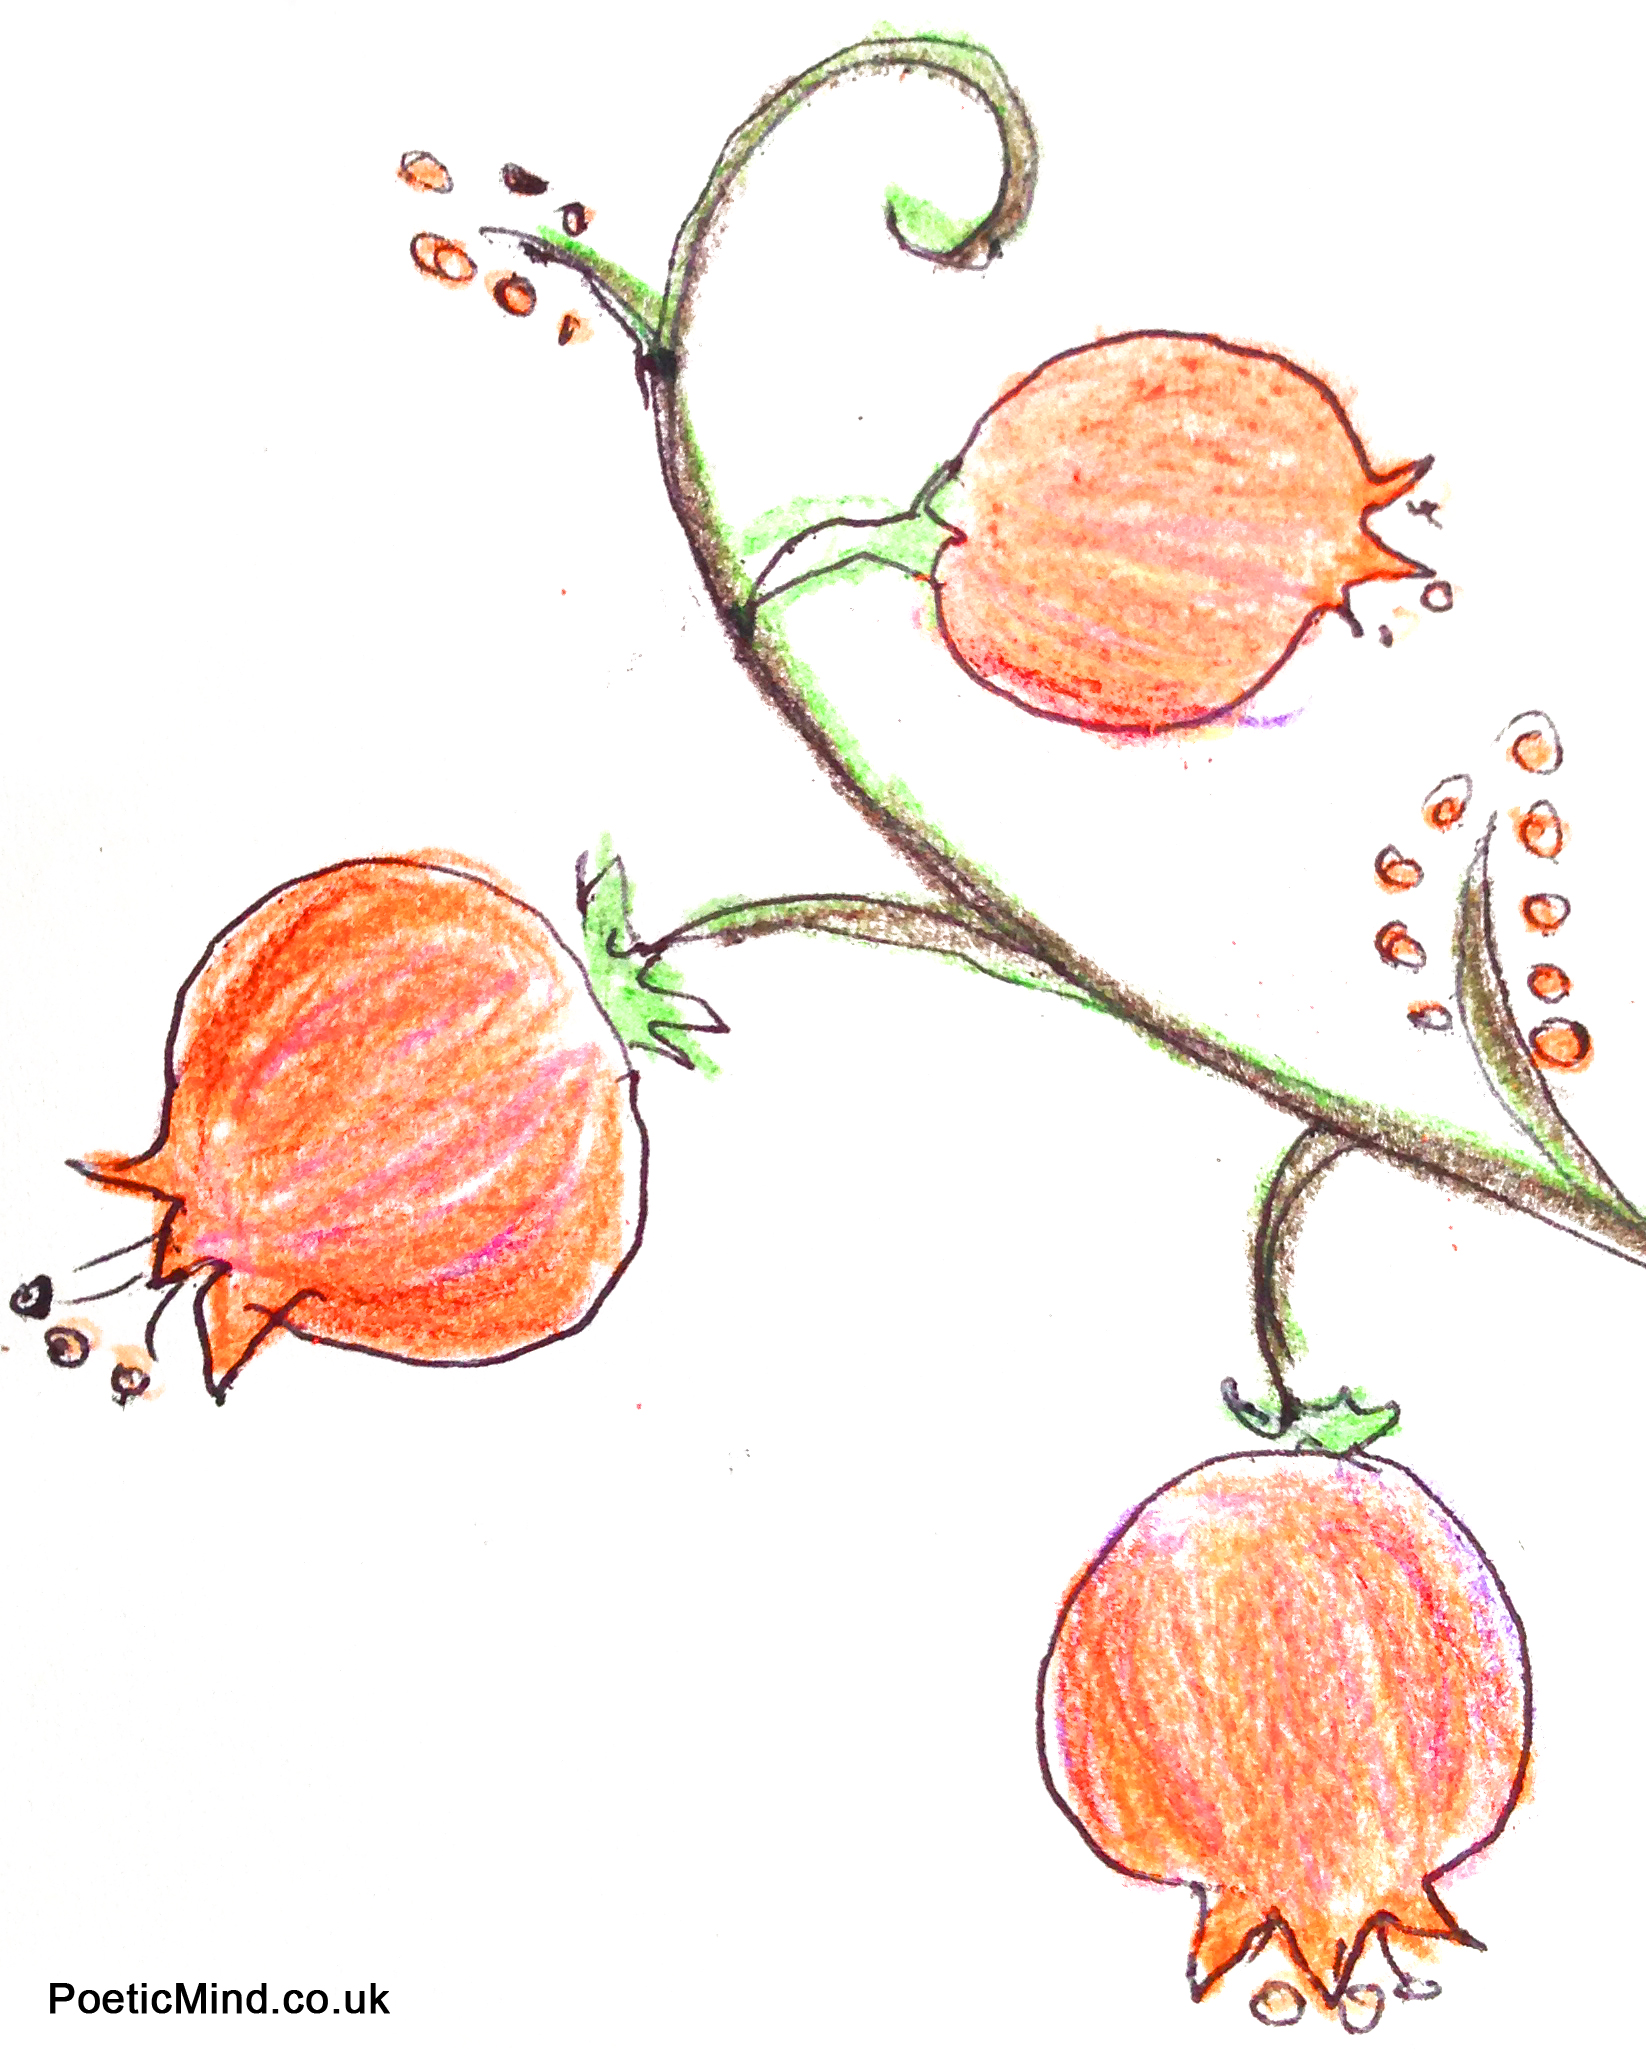 A pomegranate's abundant seeds symbolises creation, abundance, and a hope that our lives will be fruitful with good deeds. Illustration by Natalie and Gil Dekel.